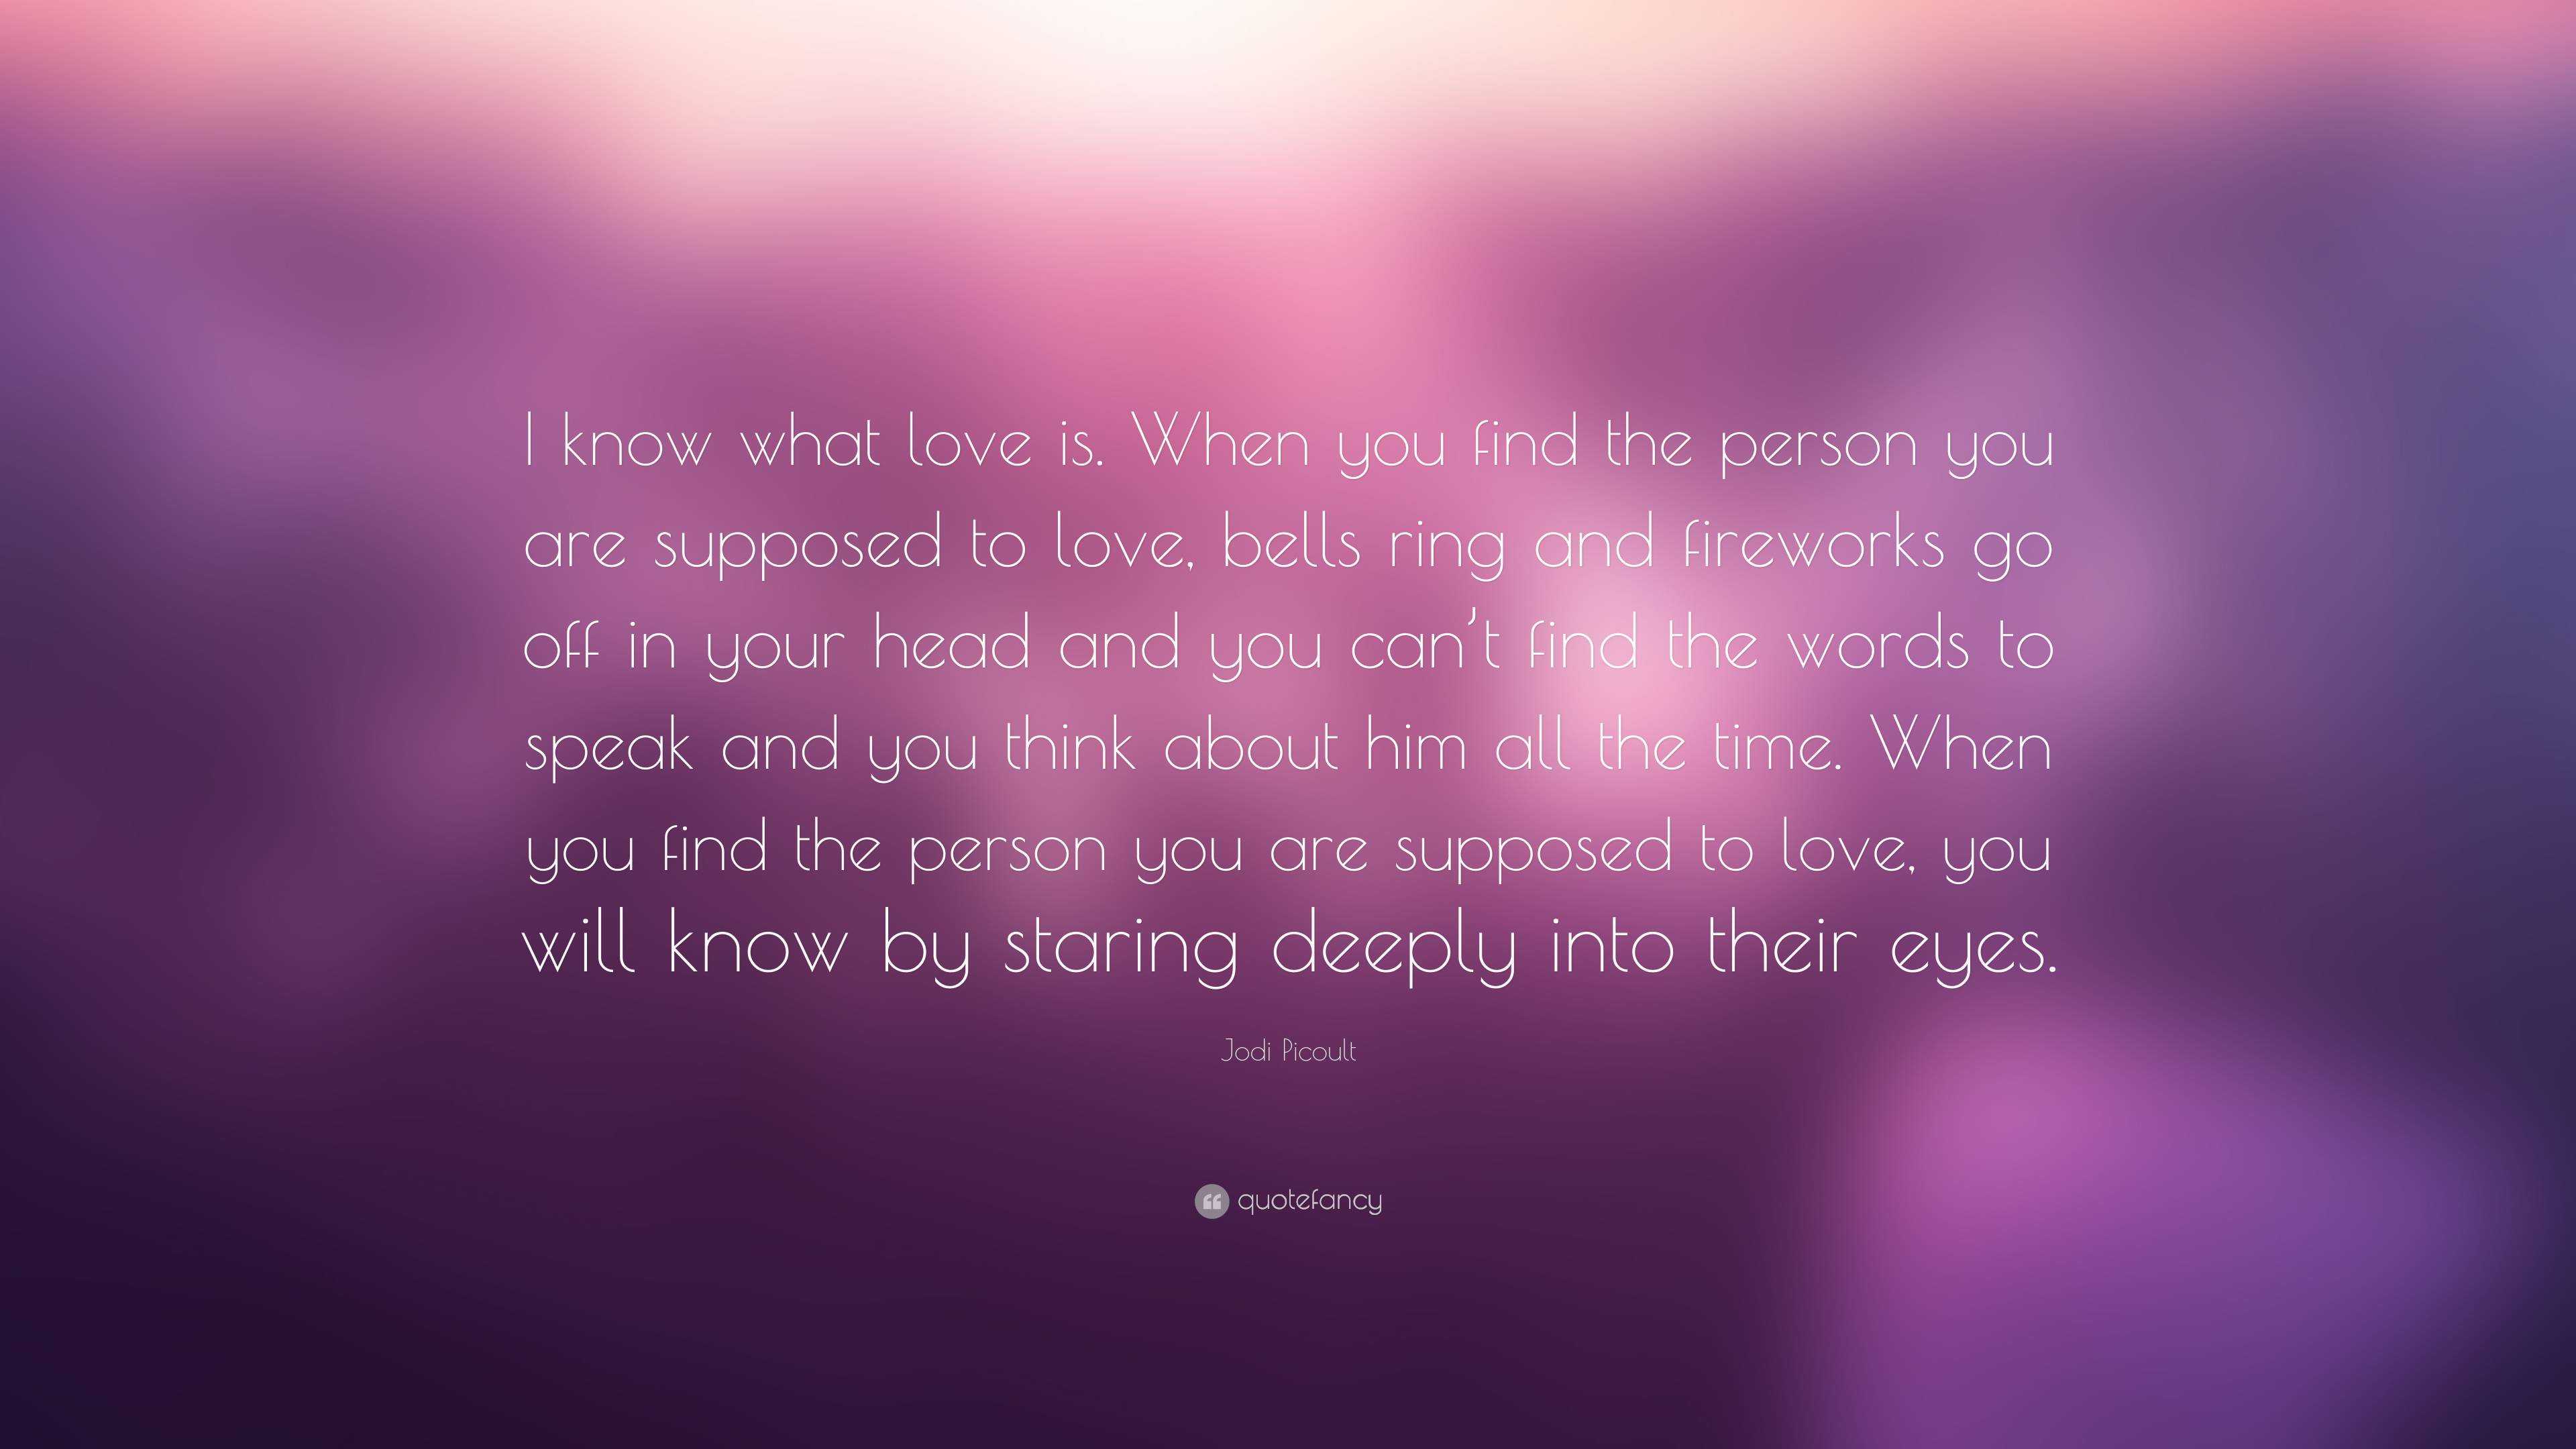 Jodi Picoult Quote: “I know what love is. When you find the person you ...